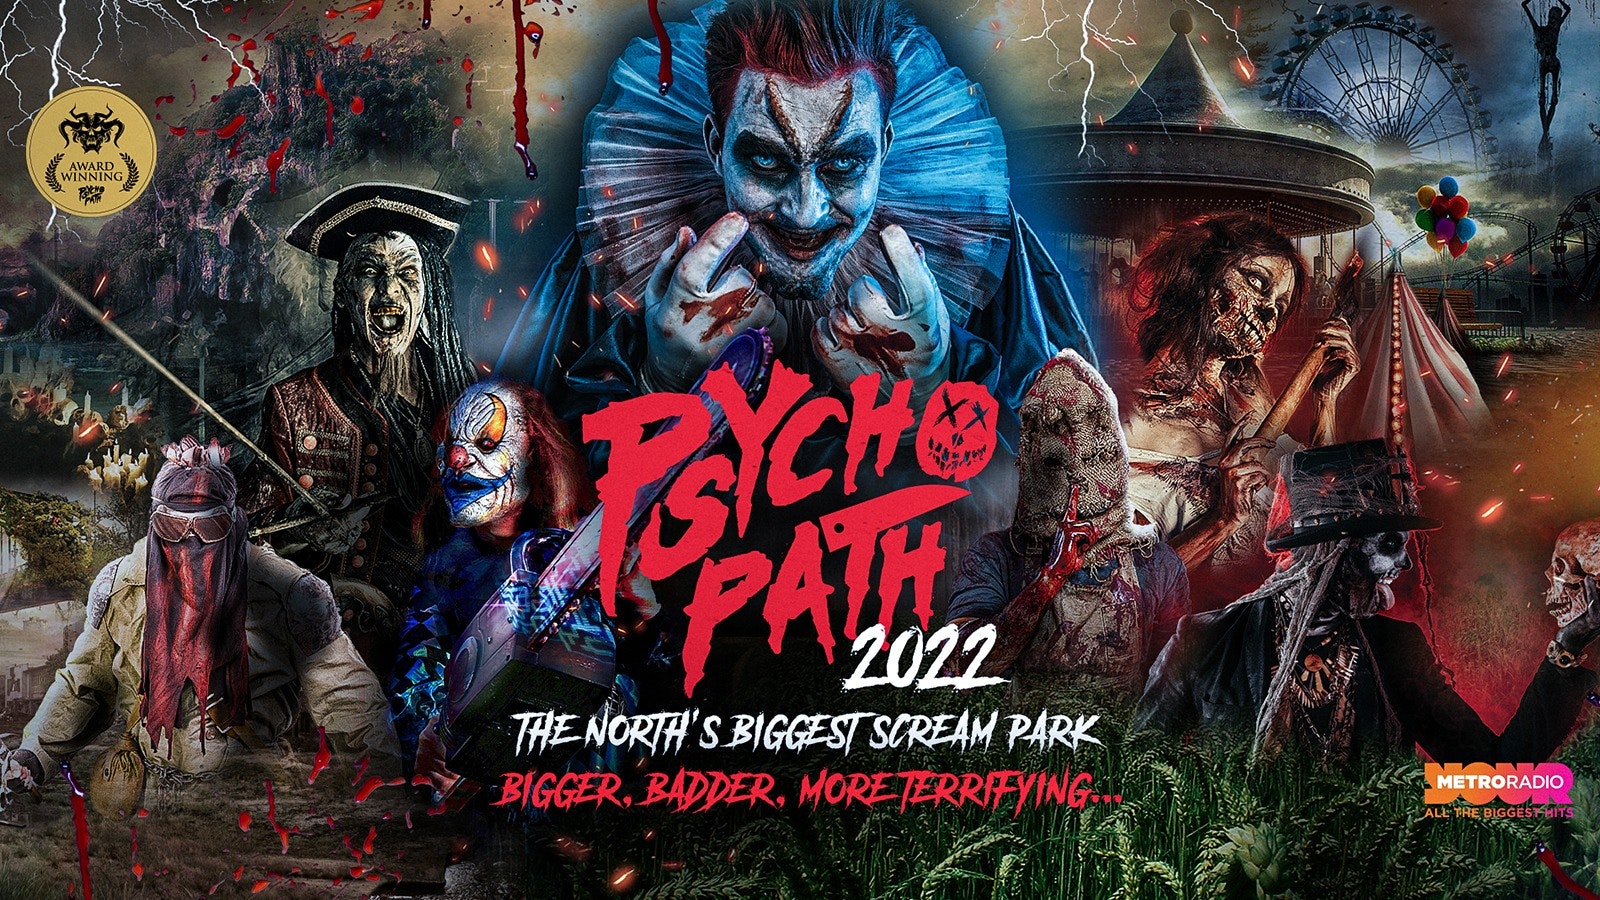 Psycho Path Presents FearGround – Oct 15th